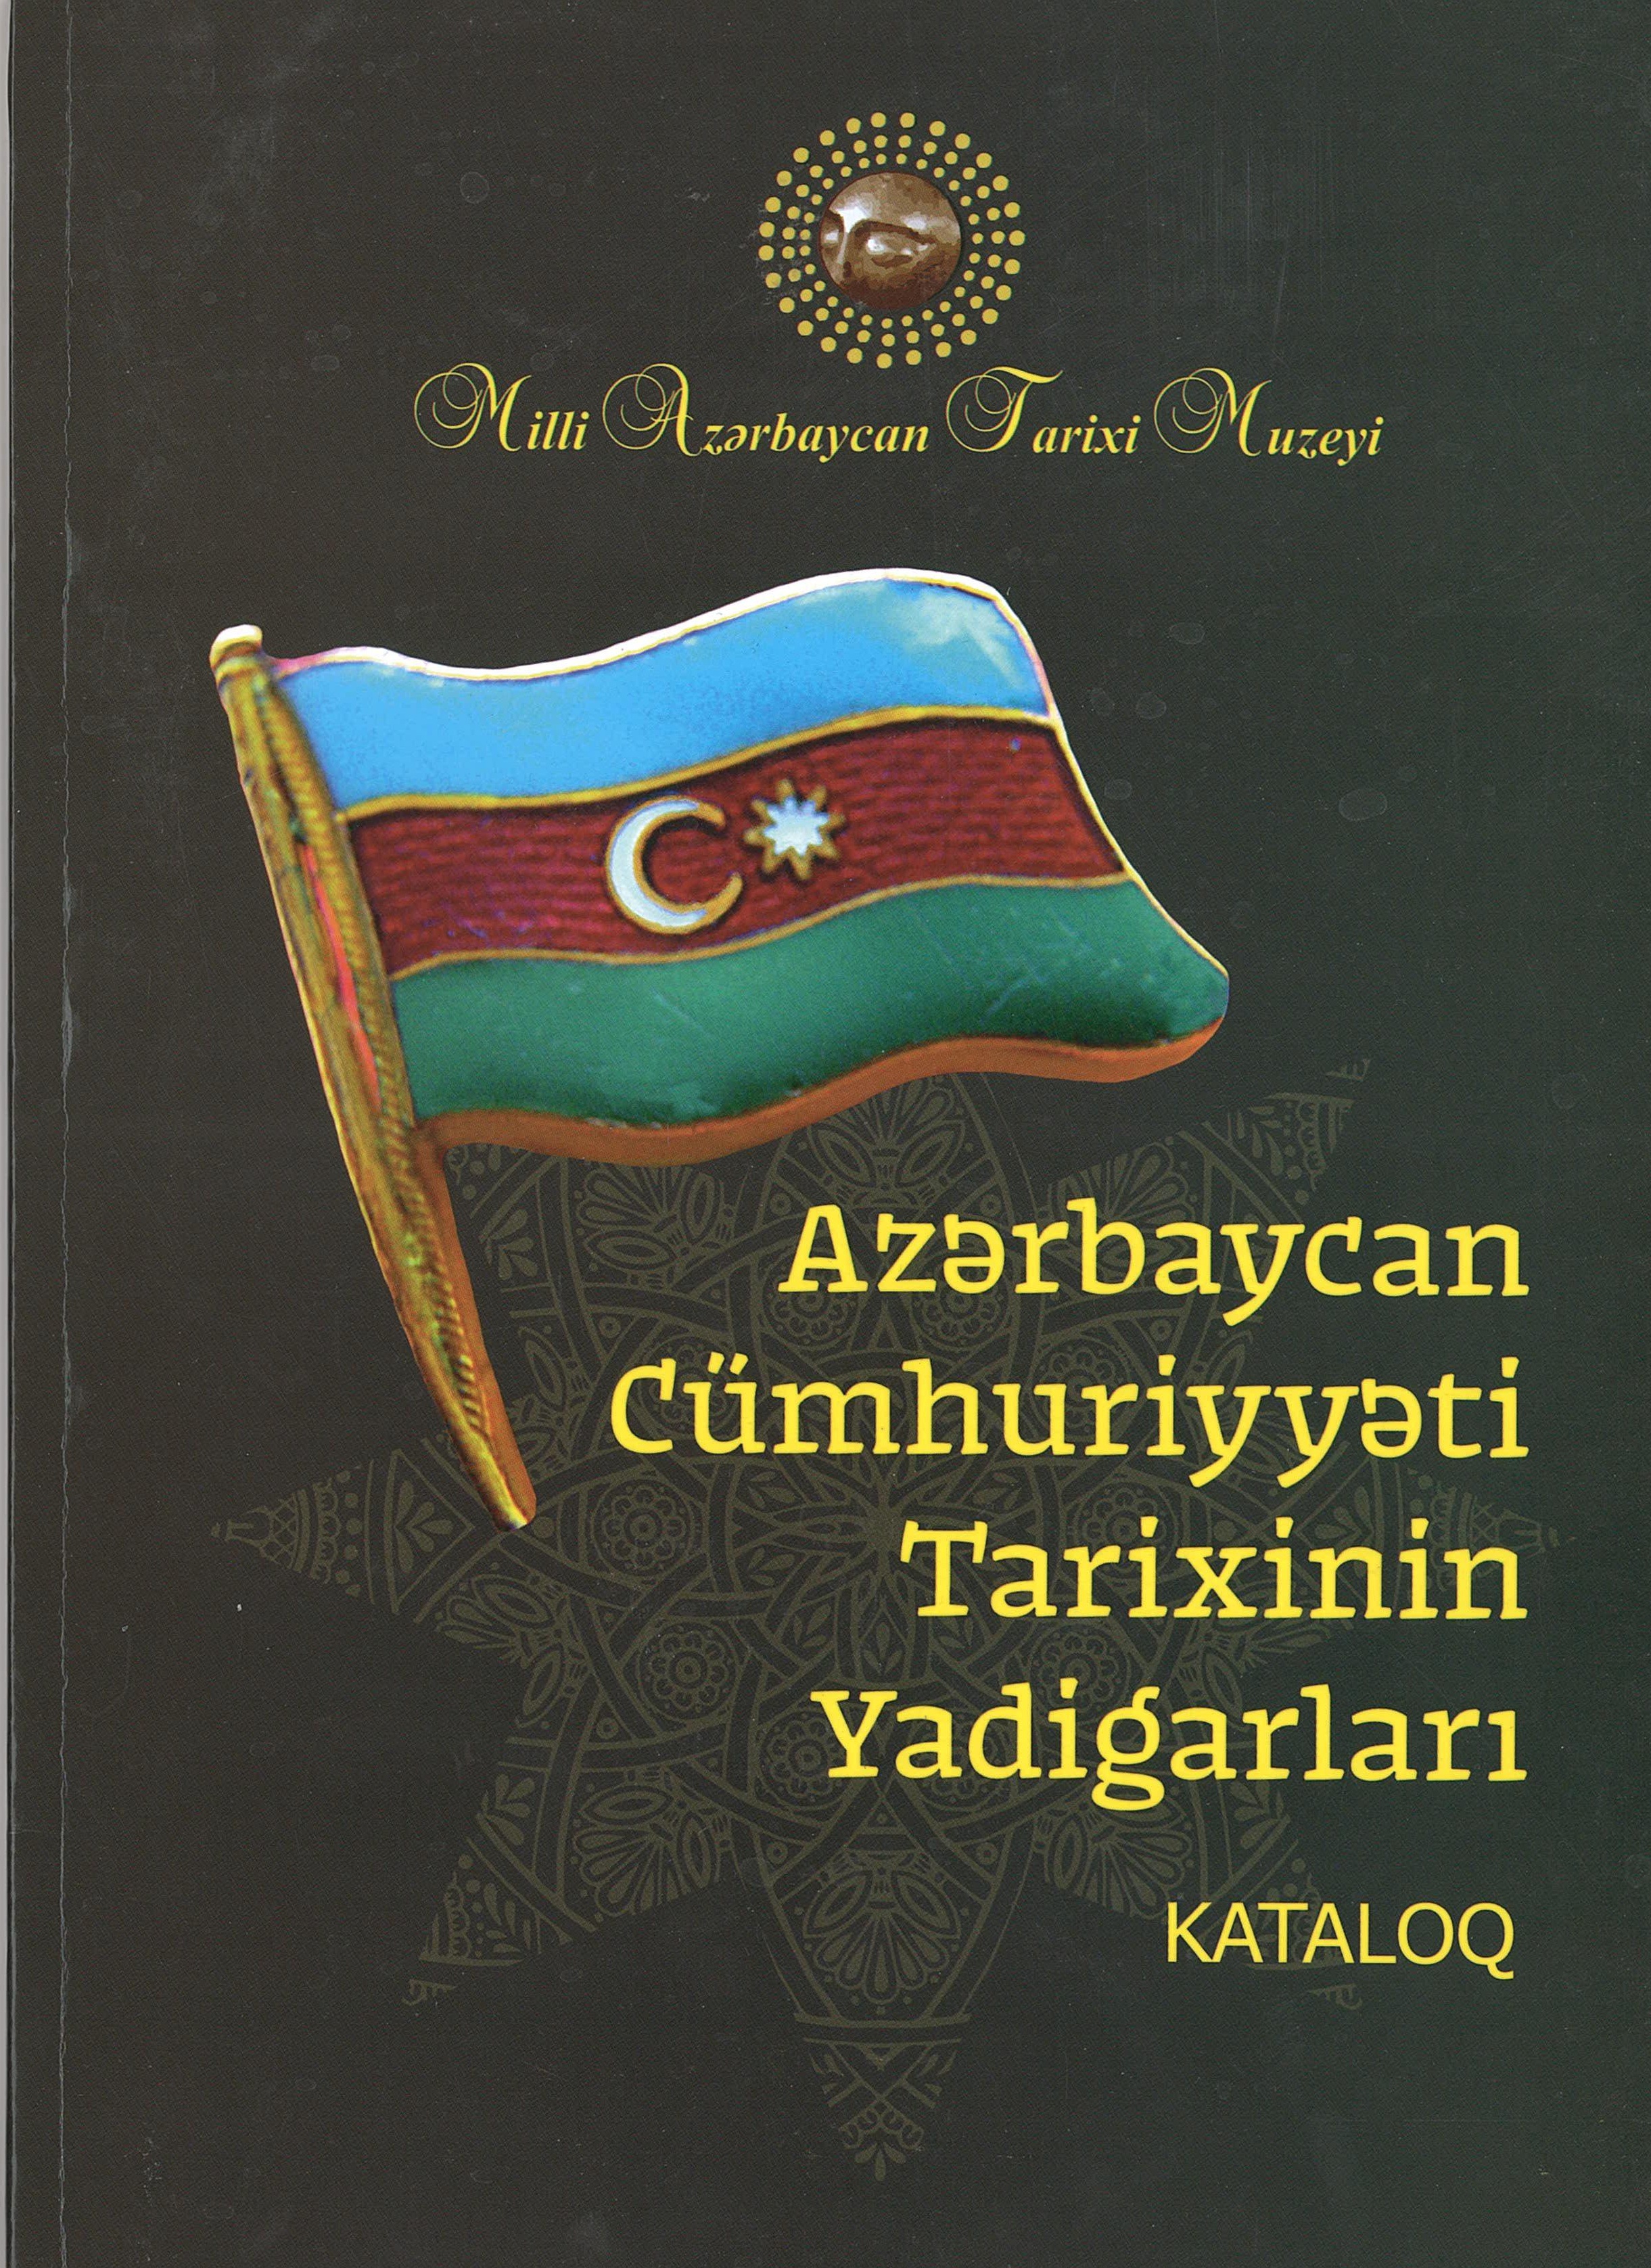  Monuments of the history of the Republic of Azerbaijan